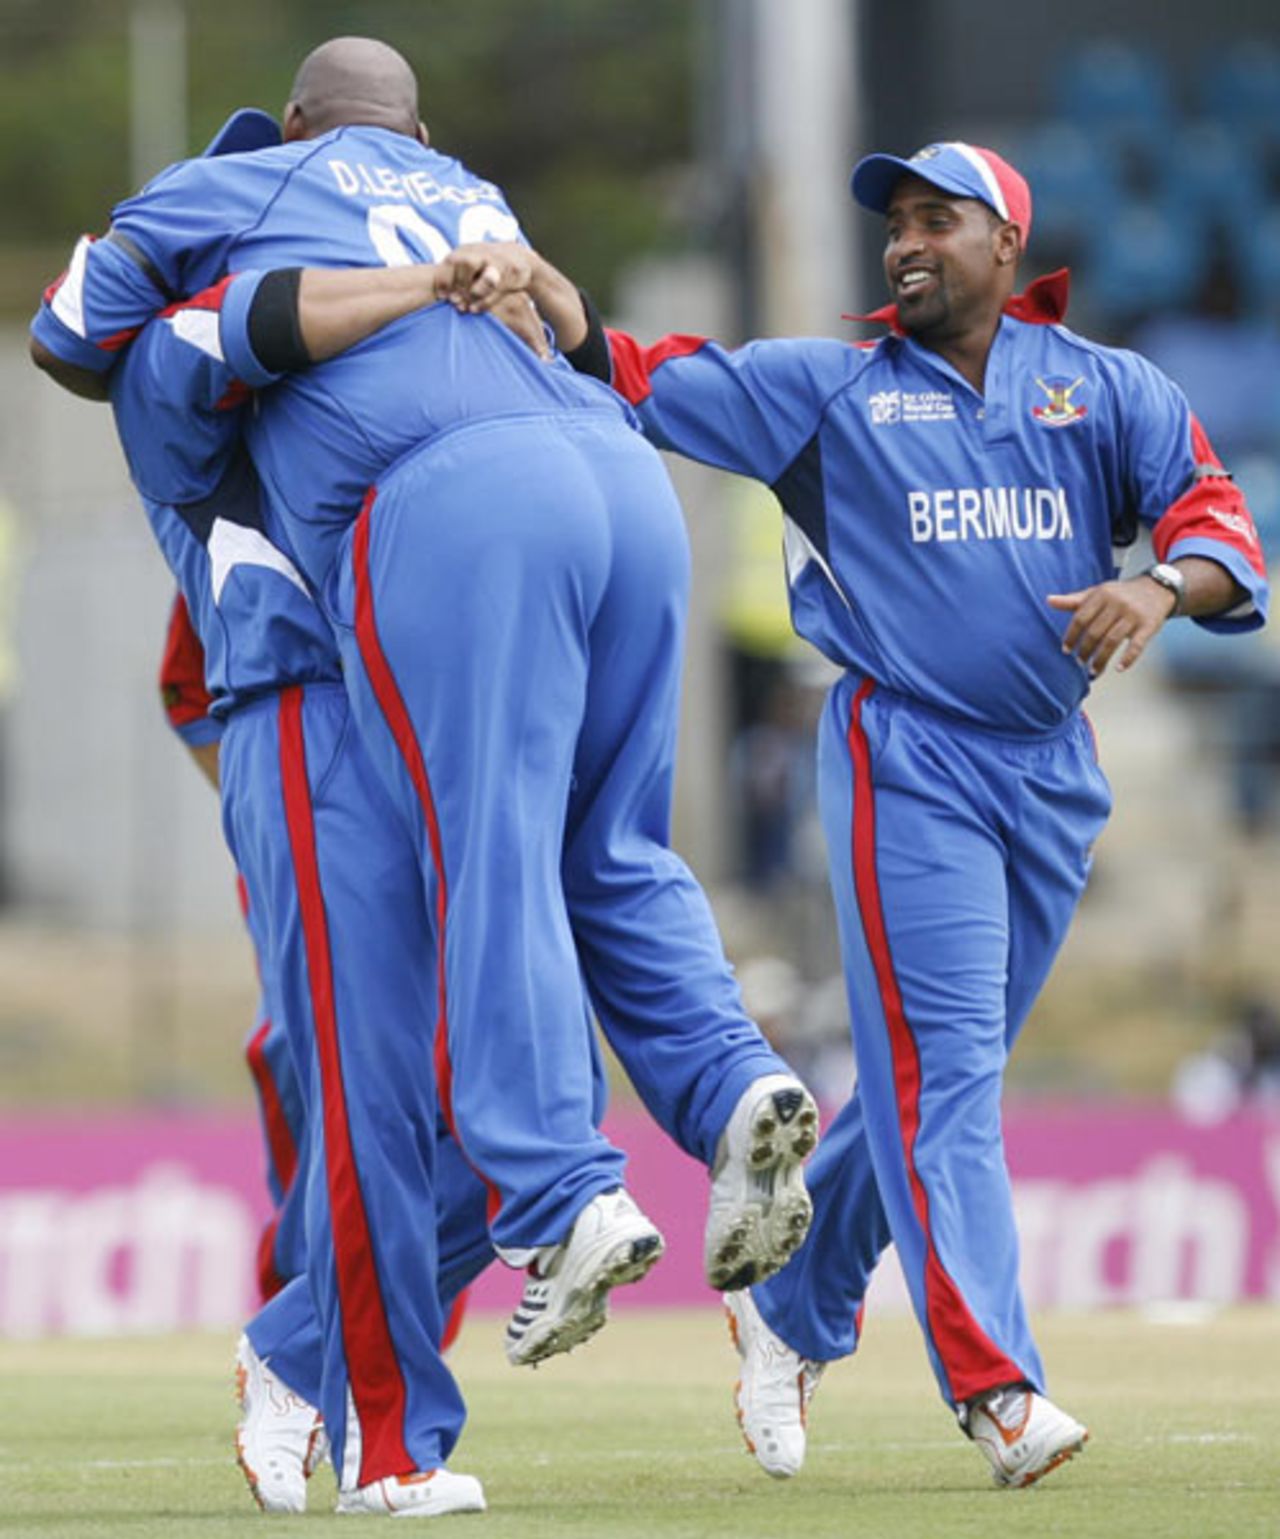 Dwayne Leverock is lifted off his feet by Irvine Romaine as Kwame Tuckerlooks on after a stunning one-handed catch to dismiss Robin Uthappa, Bermuda v India, Group B, Trinidad, March 19, 2007